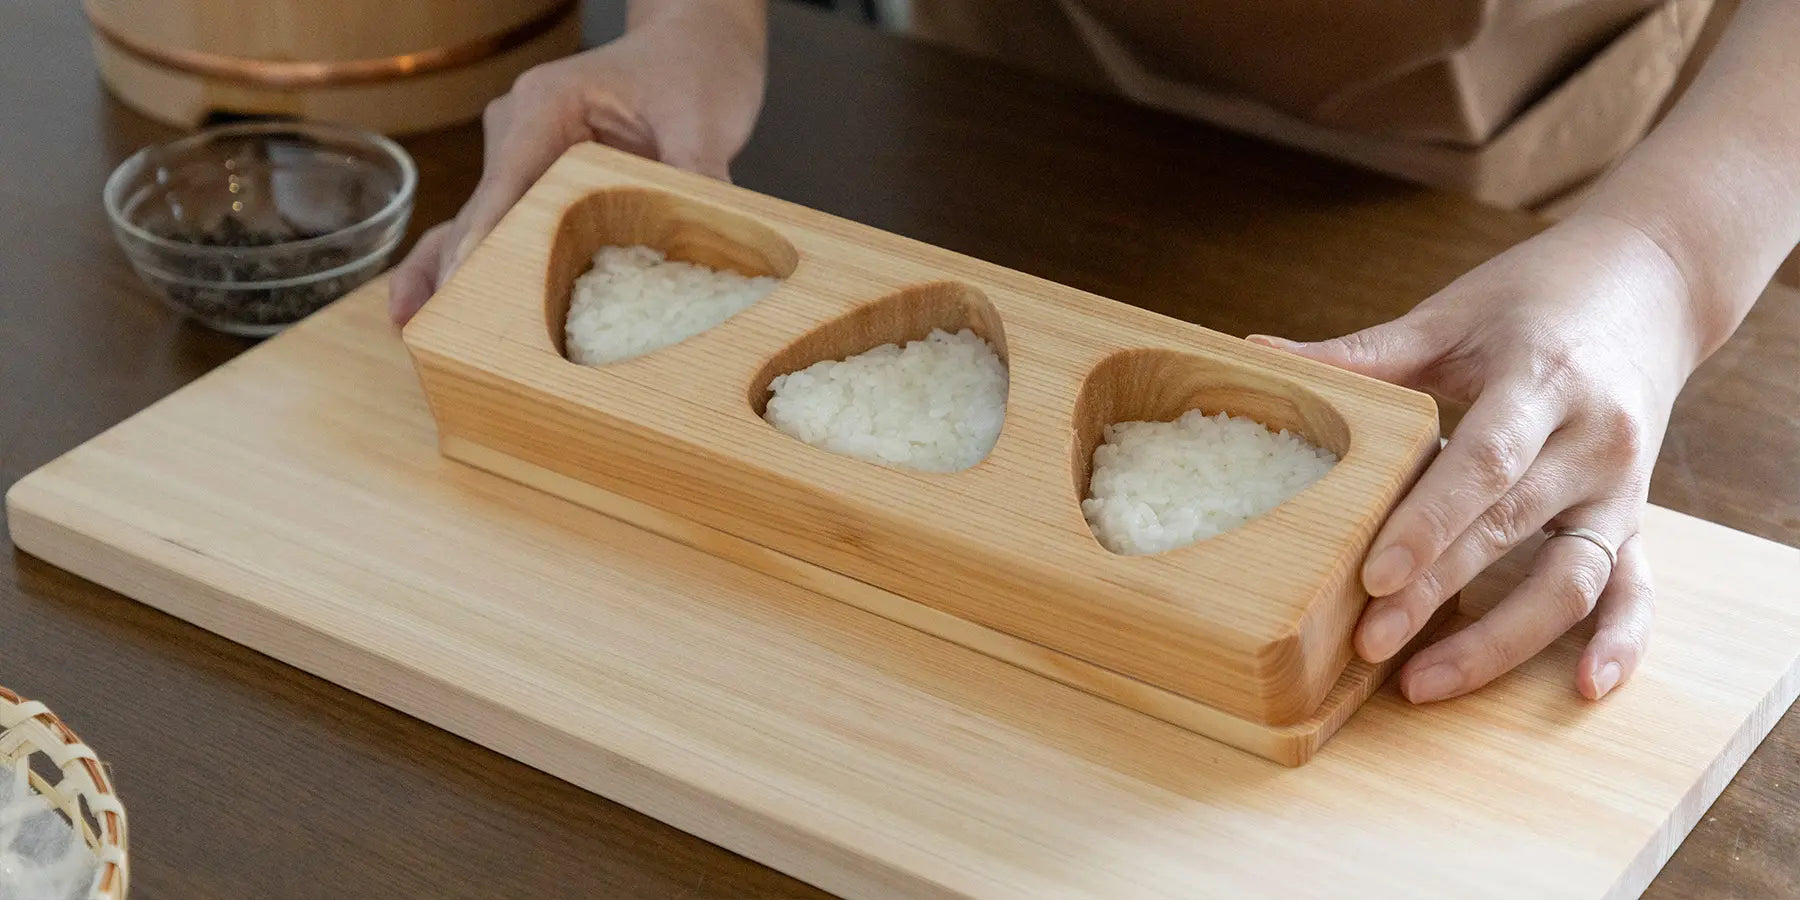 Discover our great selection of Onigiri supplies on Globalkitchen Japan.